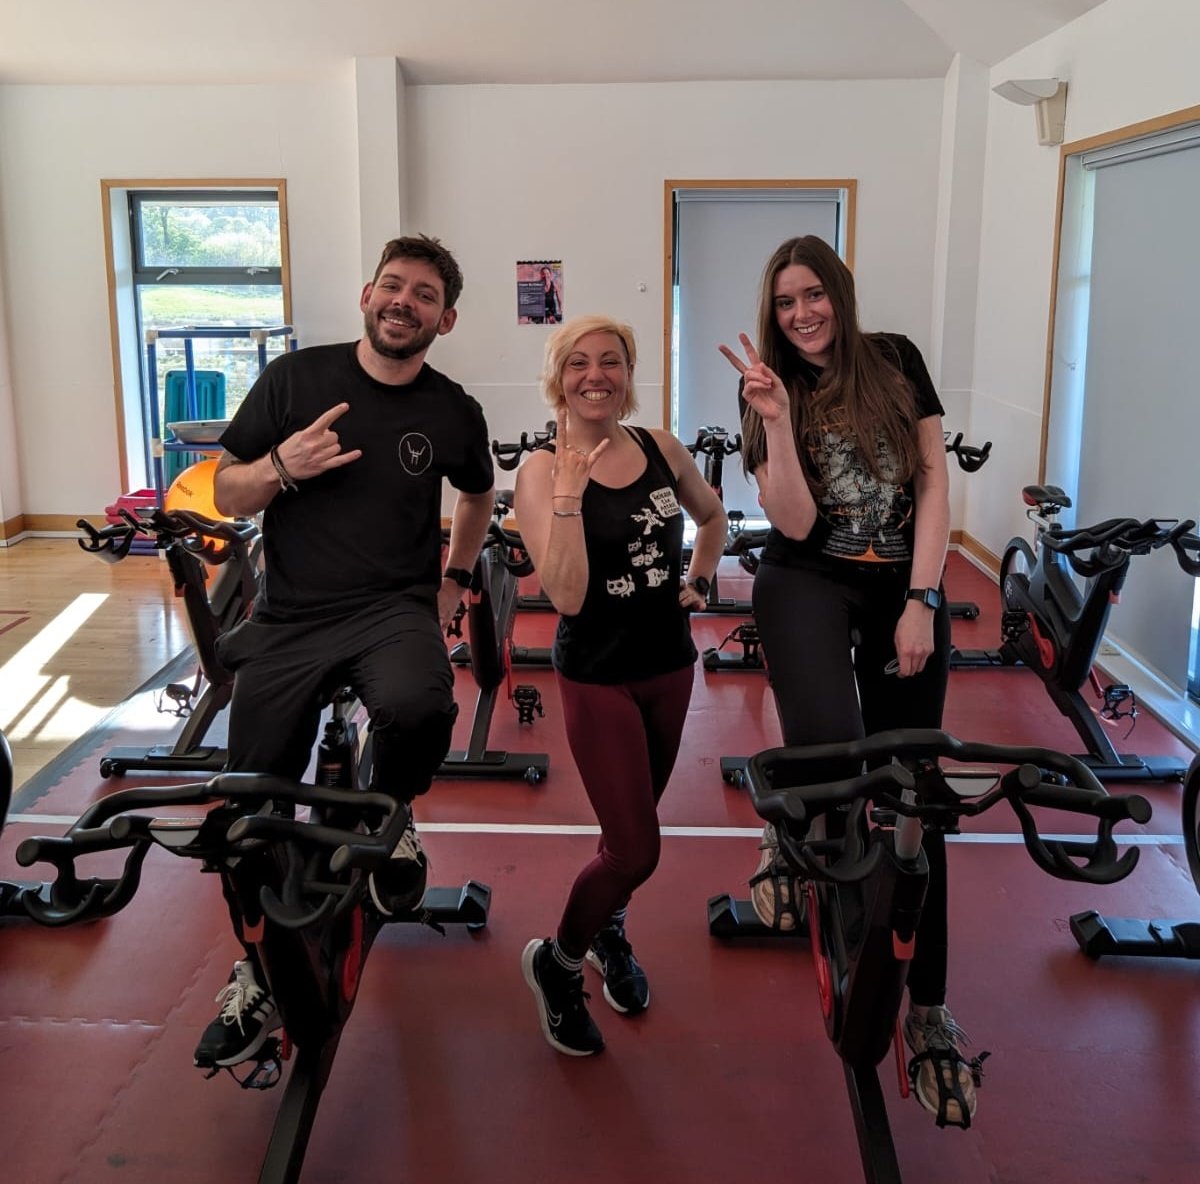 Meet The Team 🙌🏻

Co-founders Heather & Ian with our lovely instructor Andrea.

Whether you're new to the class or there every week, we'll be there to welcome you in and workout alongside to great music.

See you in the pit 🤘🏻
#indoorcycling #spin #spinclass #metalmusic #glasgow